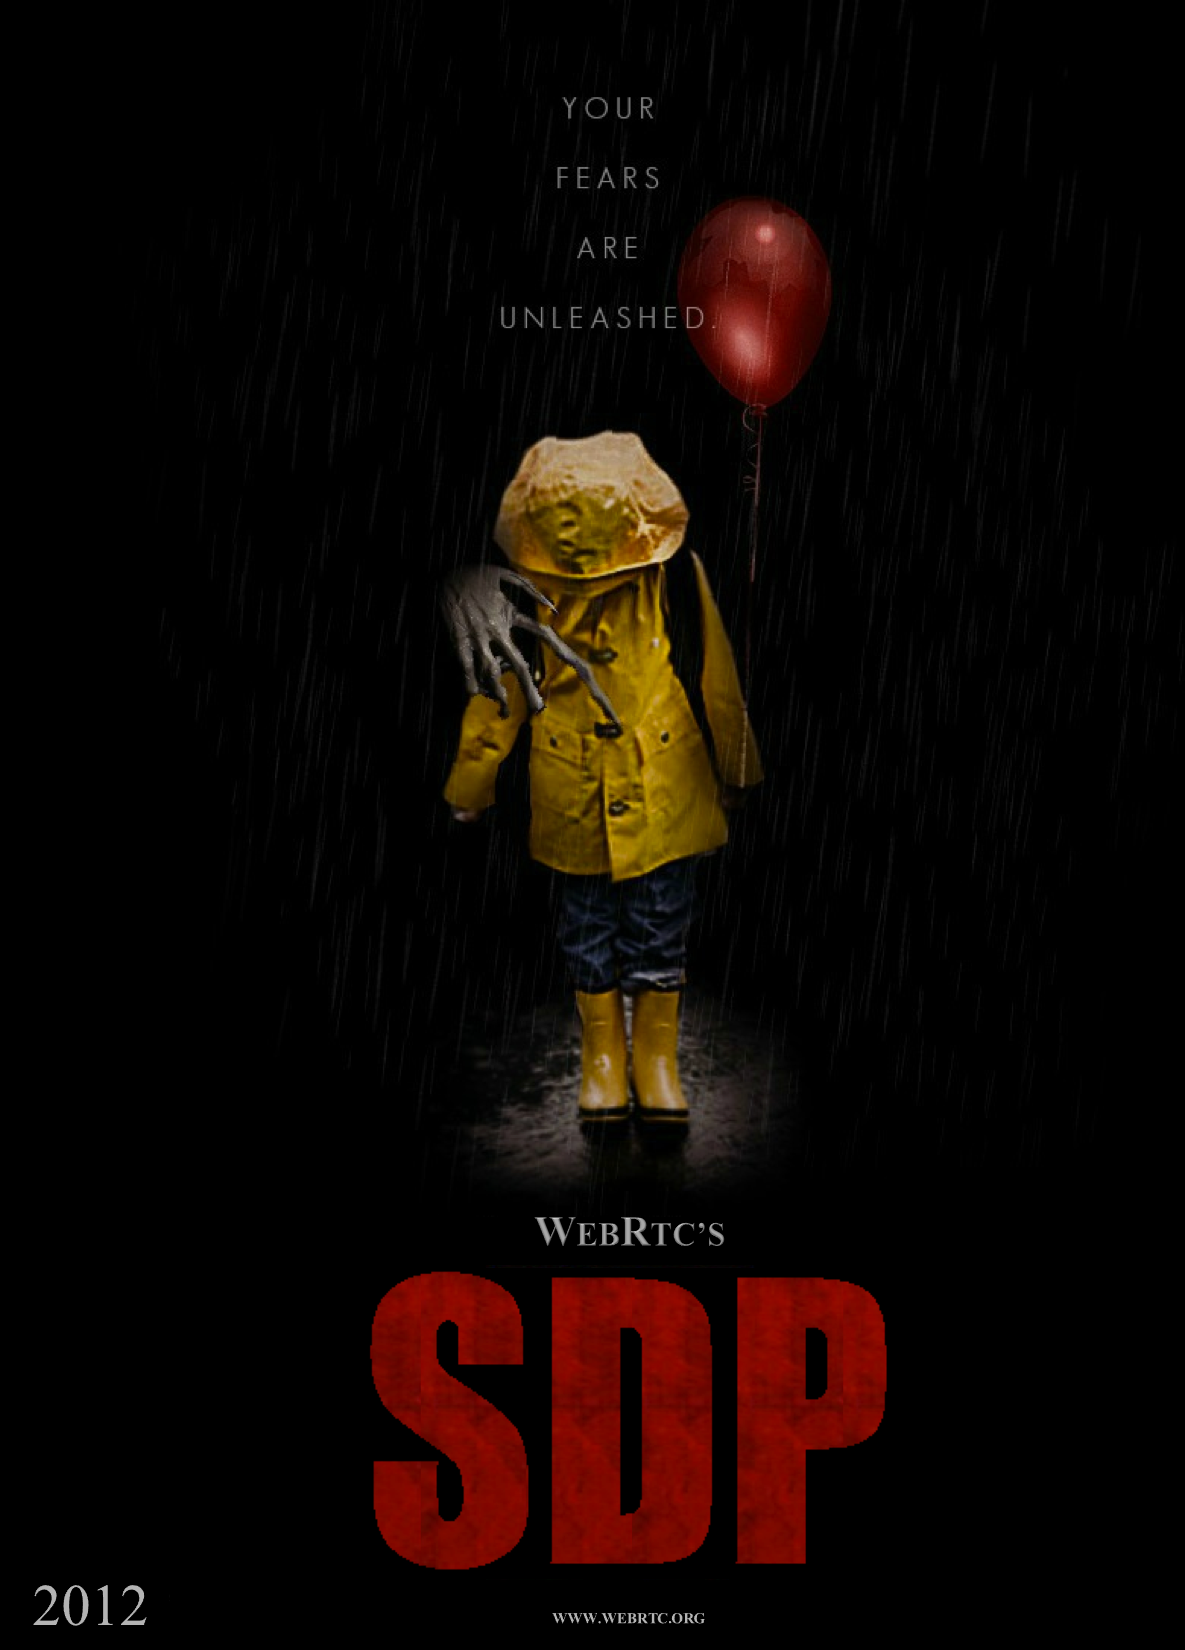 SDP: Your Fears are Unleashed - spoof of It Movie Poster